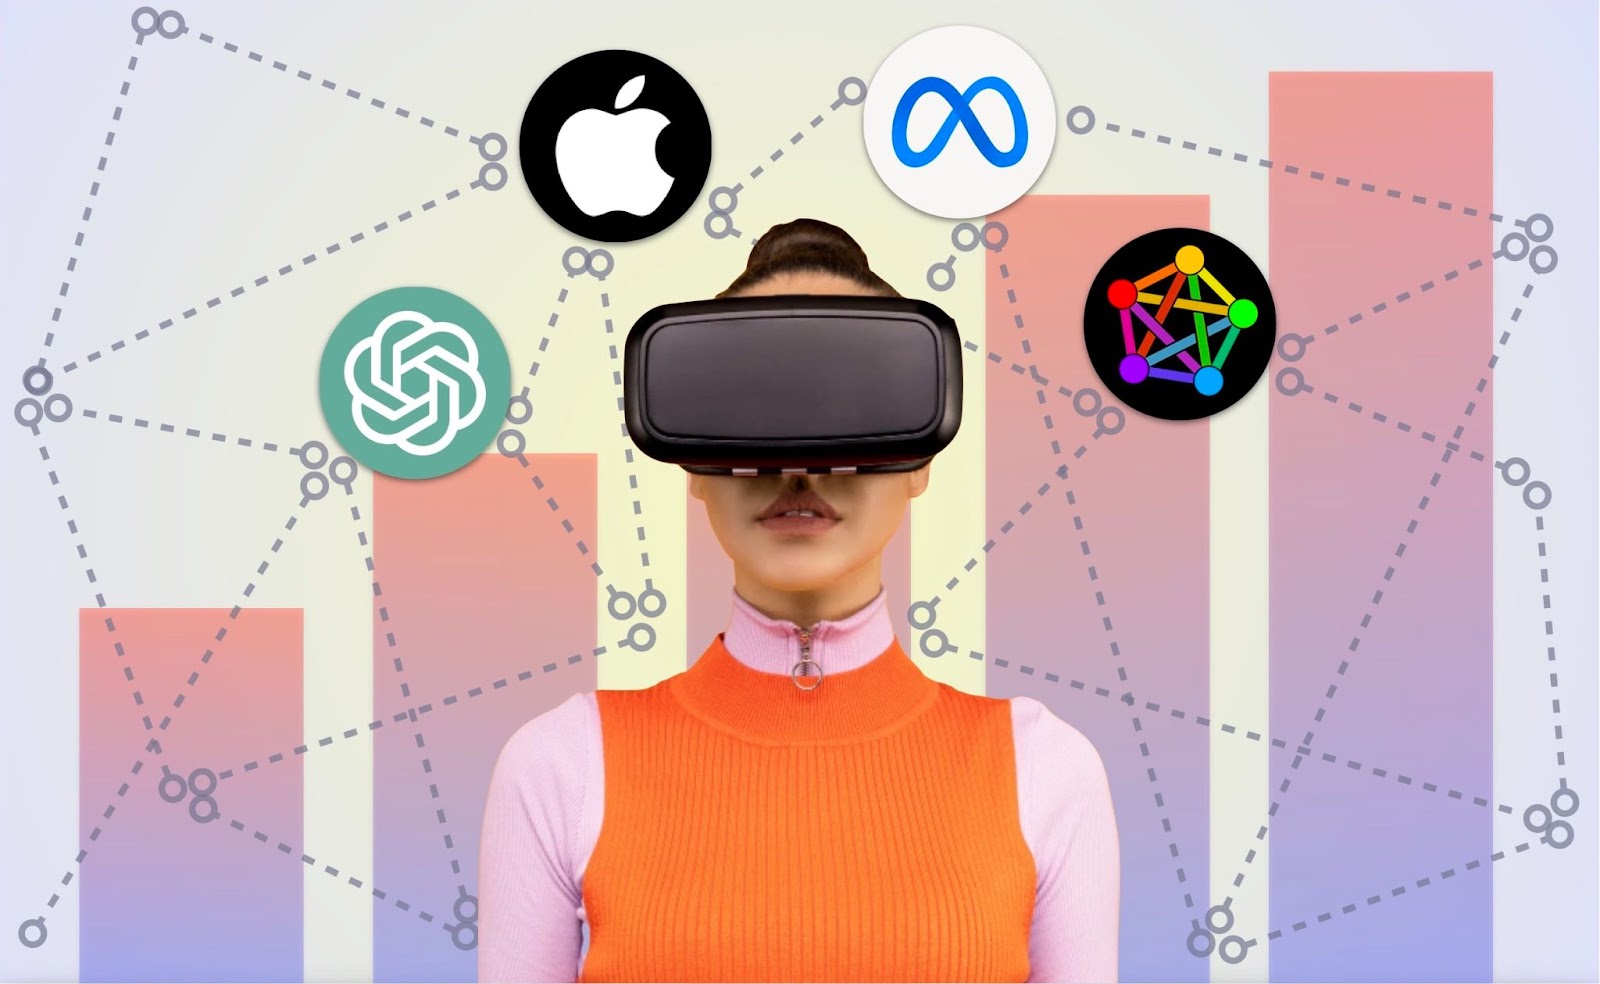 A person engrossed in VR goggles with logos of ChatGPT, Meta, Apple, and the Fediverse floating around their head. They're dressed in a simple orange vest and baby pink turtleneck. In the background, a pastel-colored bar chart and a mesh of interconnected circles depict tech trends.